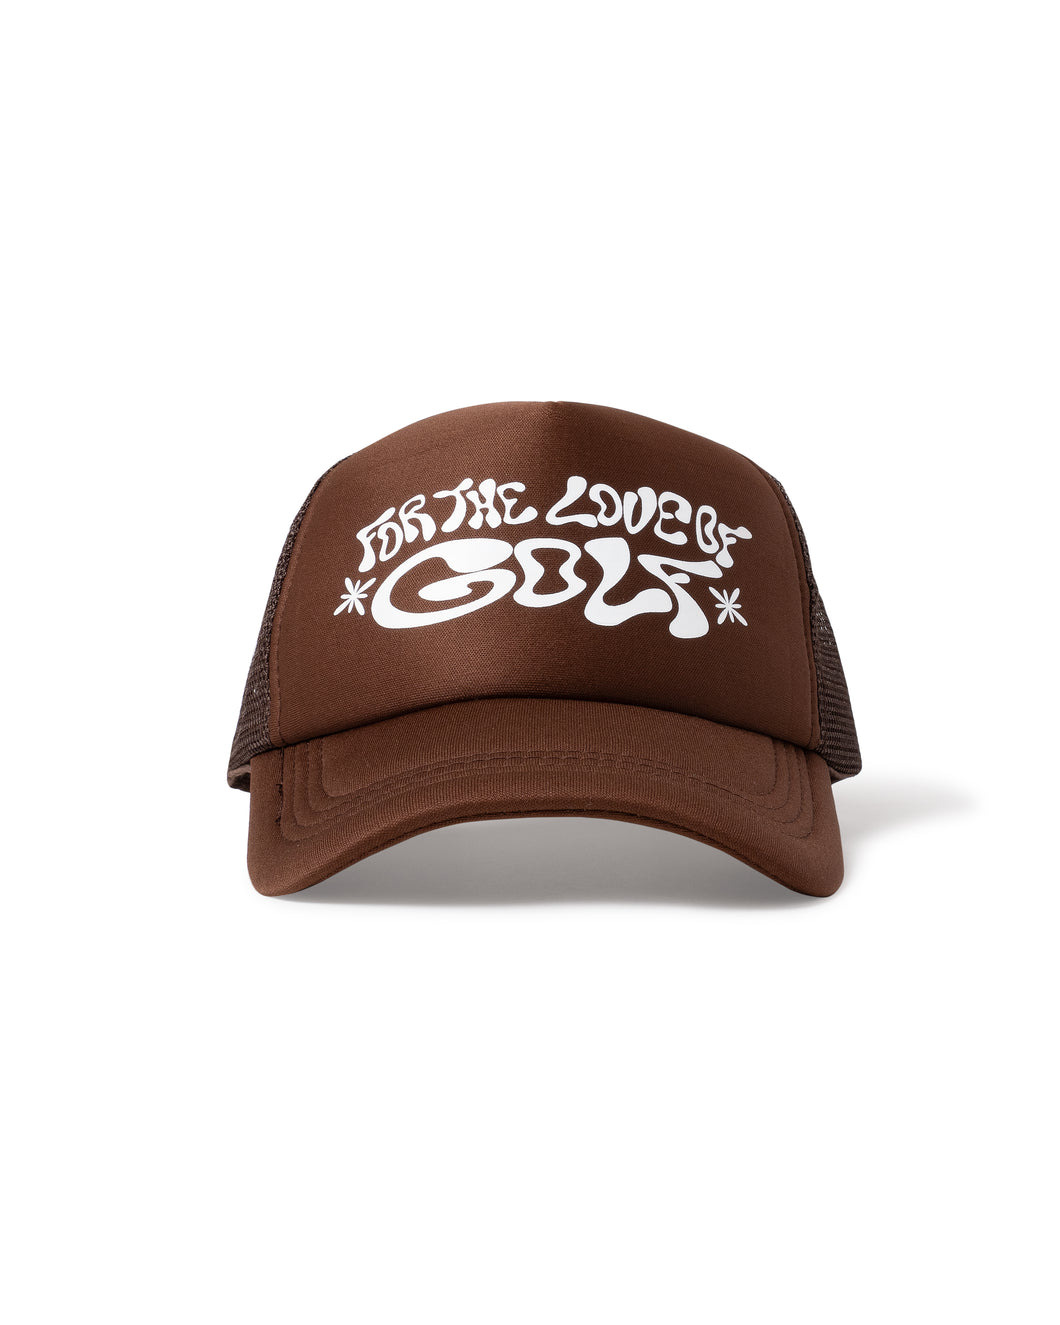 Mid 90s Club × Loom19 1990 For the love of golf Trucker Cap